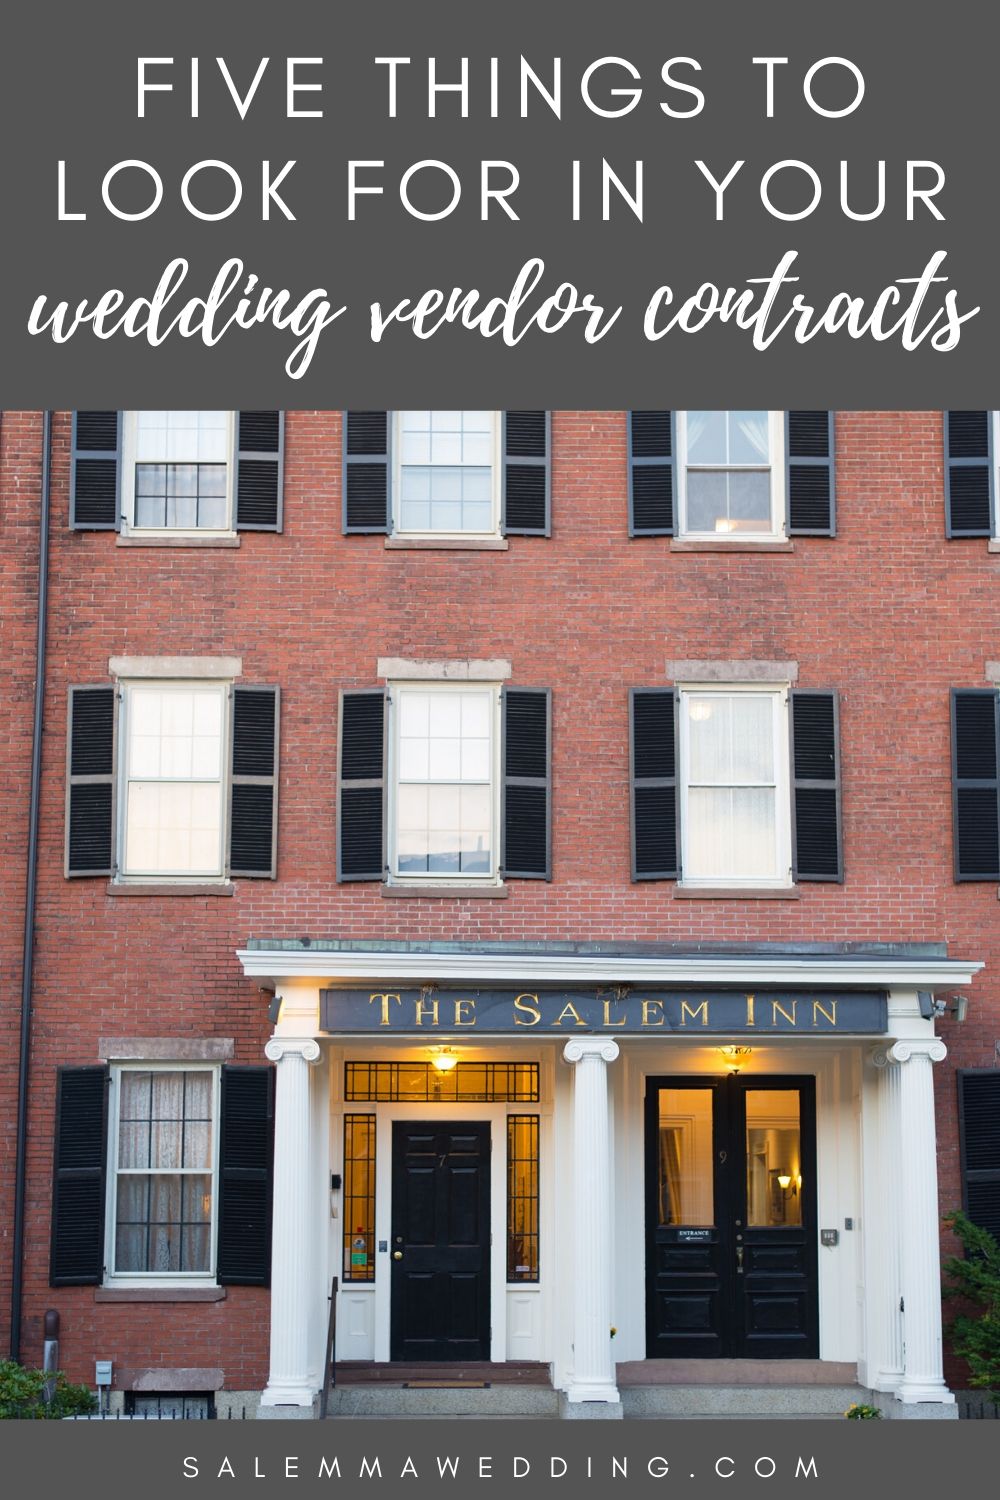 salem ma wedding, five things to look for in your wedding vendor contracts